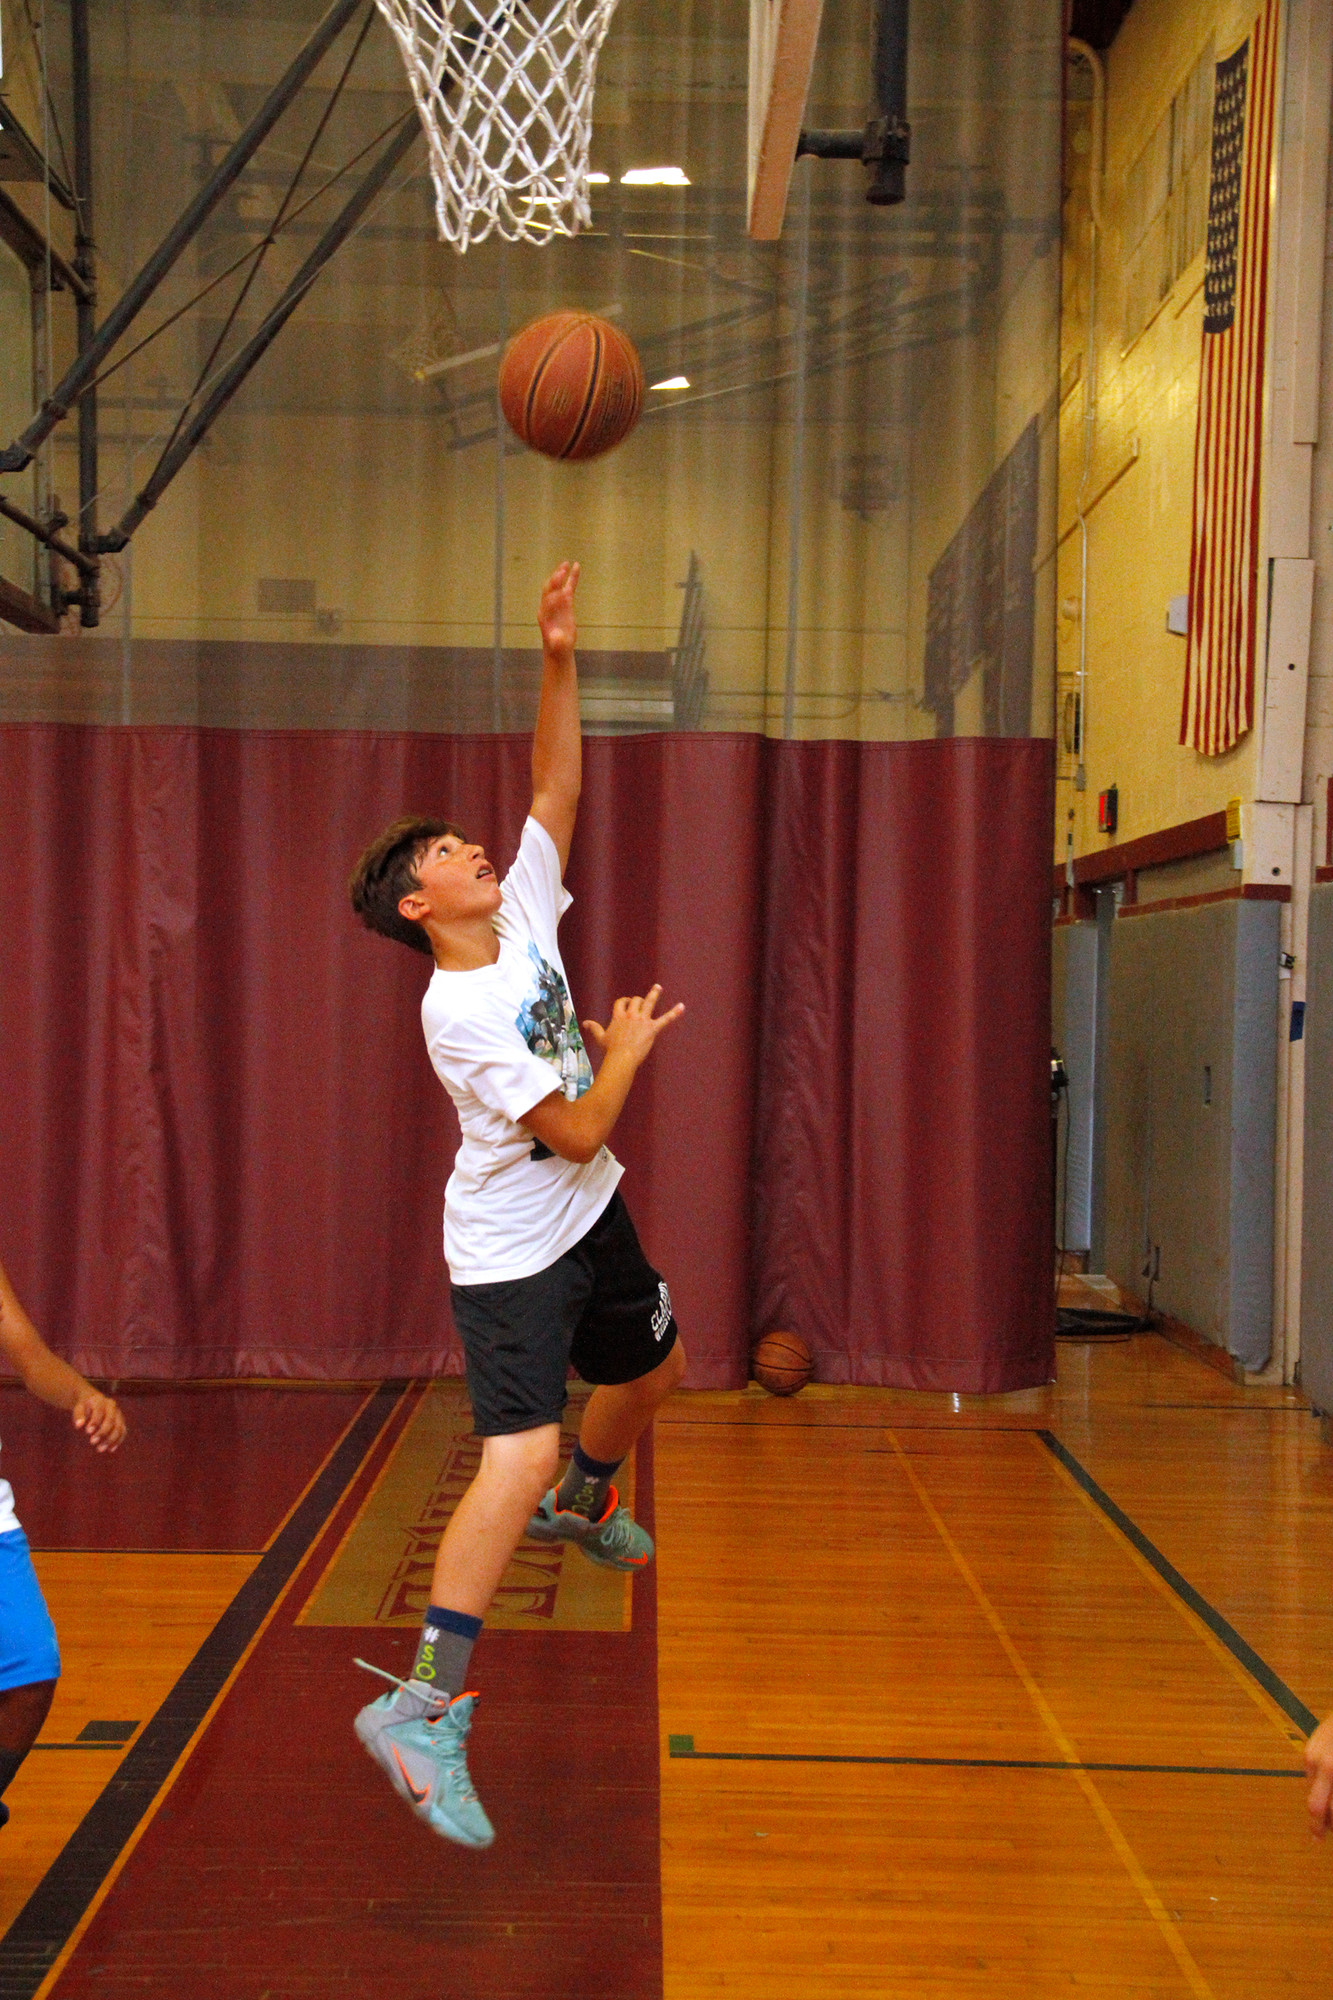 Lucas Rubenstein executed a lay-up at W.T. Clarke High School during East Meadow’s CAPE summer sports program last week.